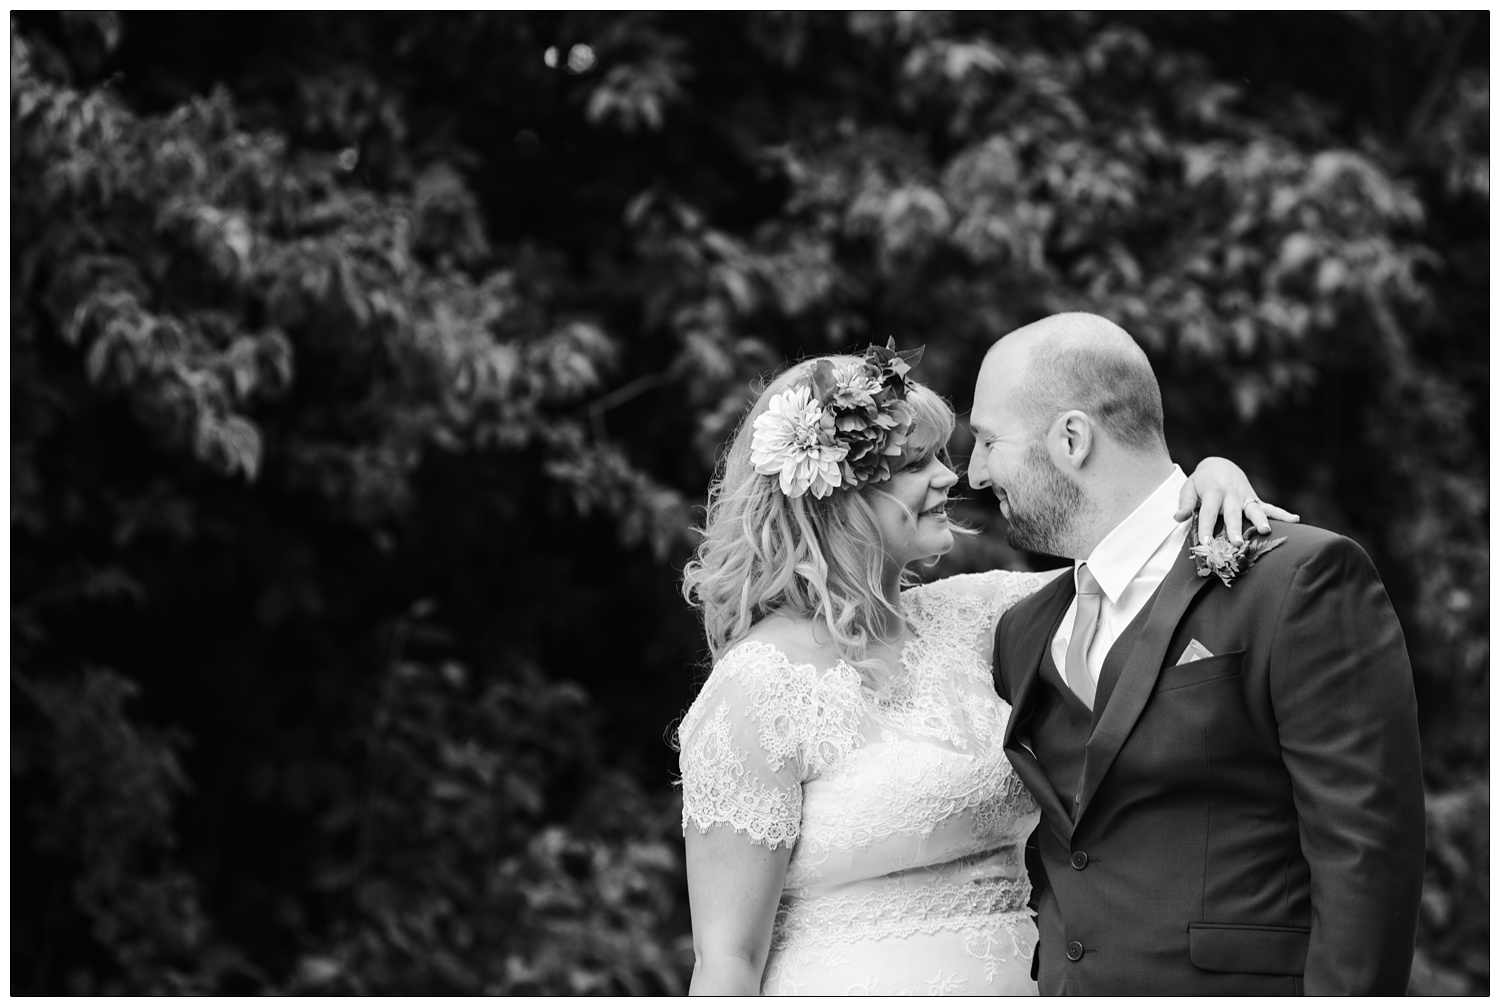 Black and white wedding portrait. Bride has her arm around the groom and is almost kissing.